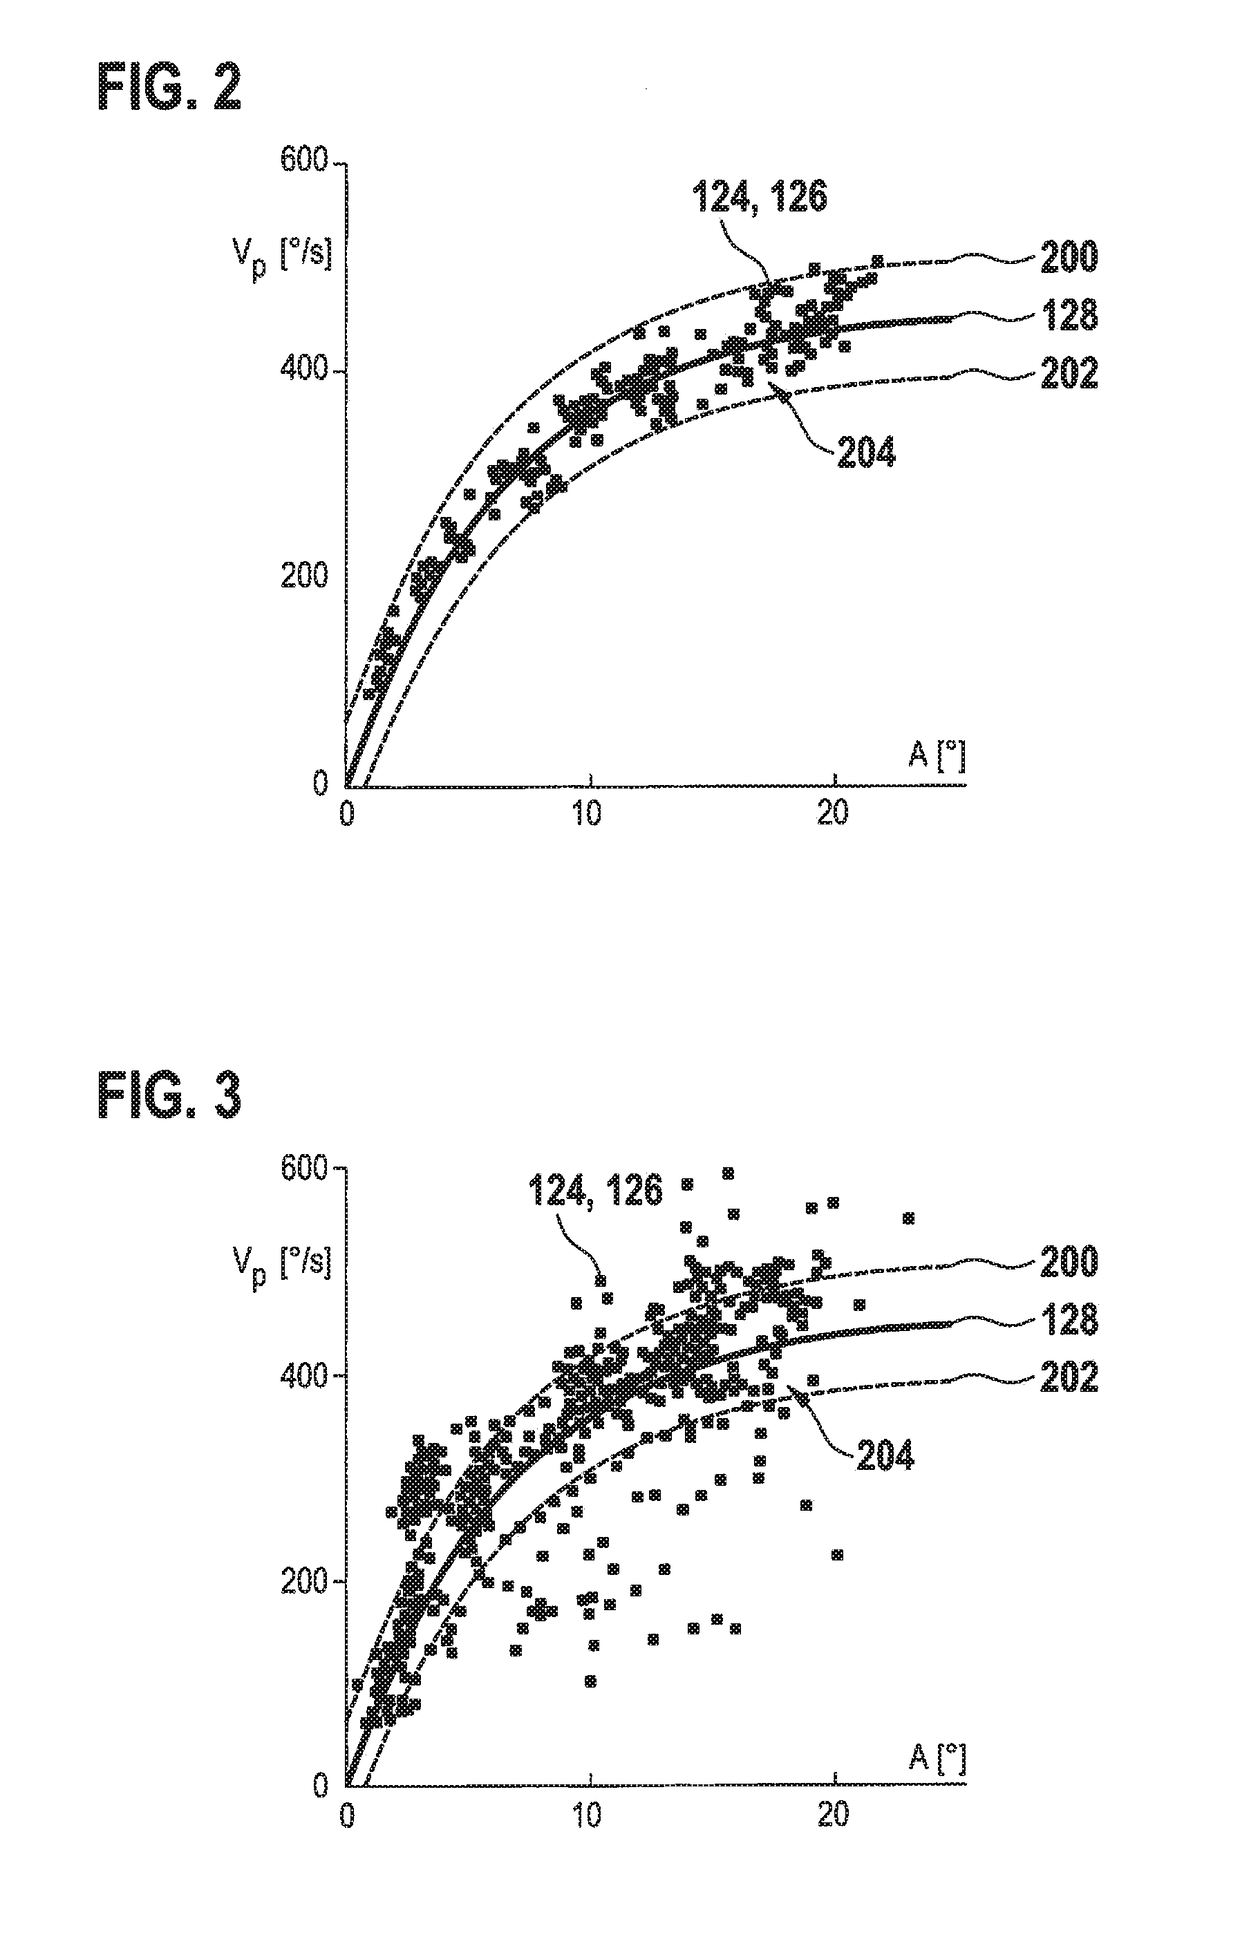 Method and apparatus for recognizing fatigue affecting a driver